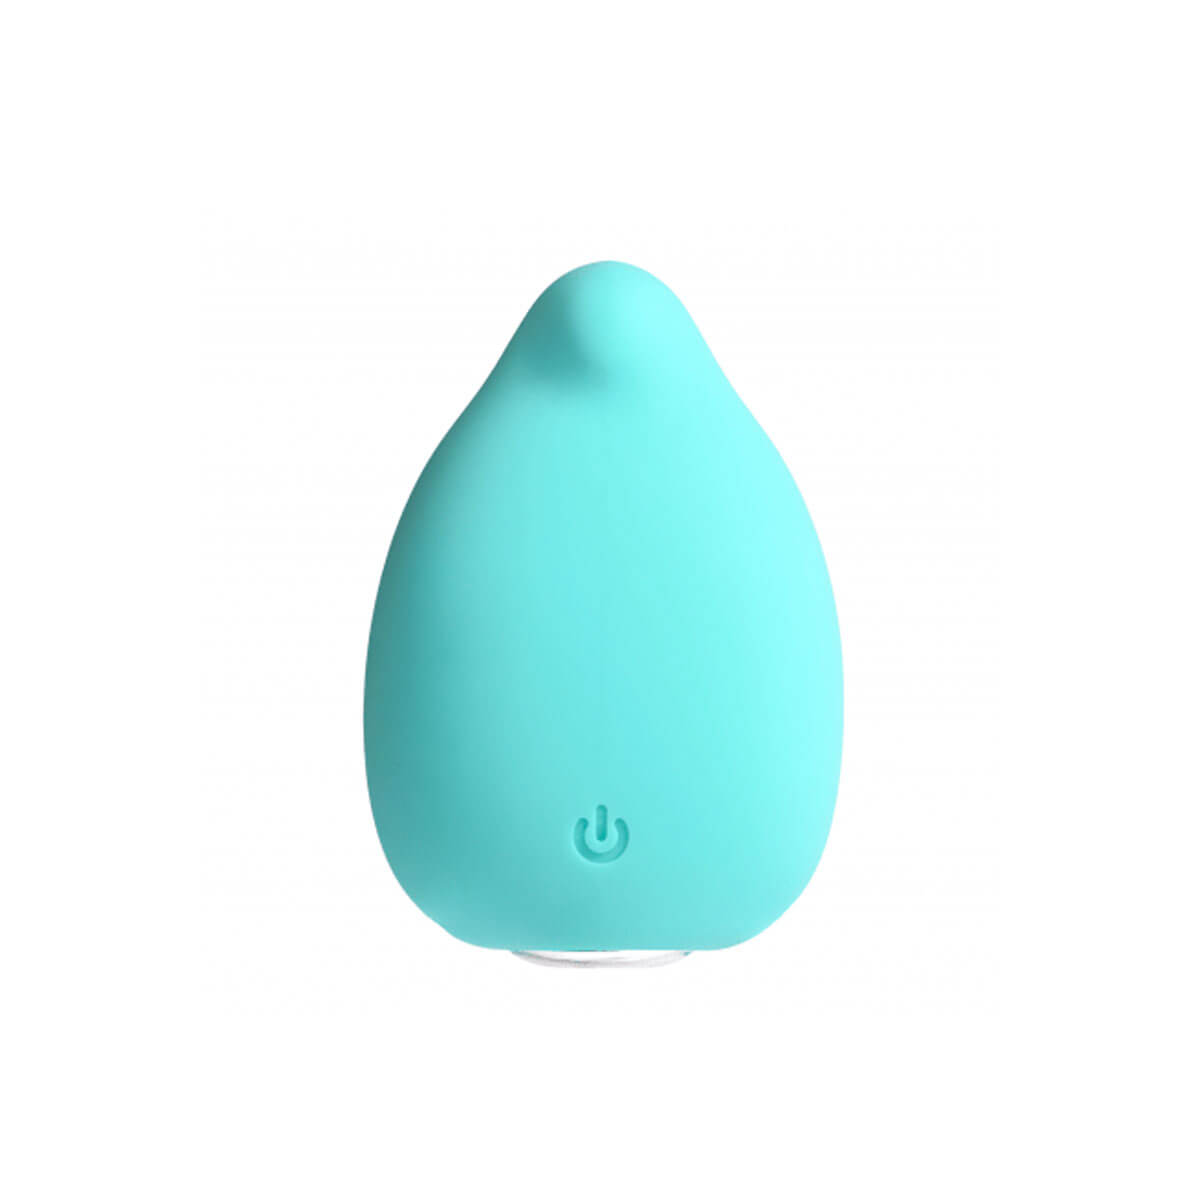 Turquoise silky-smooth silicone finger vibrator with a tip for pinpoint sensation Nudie Co